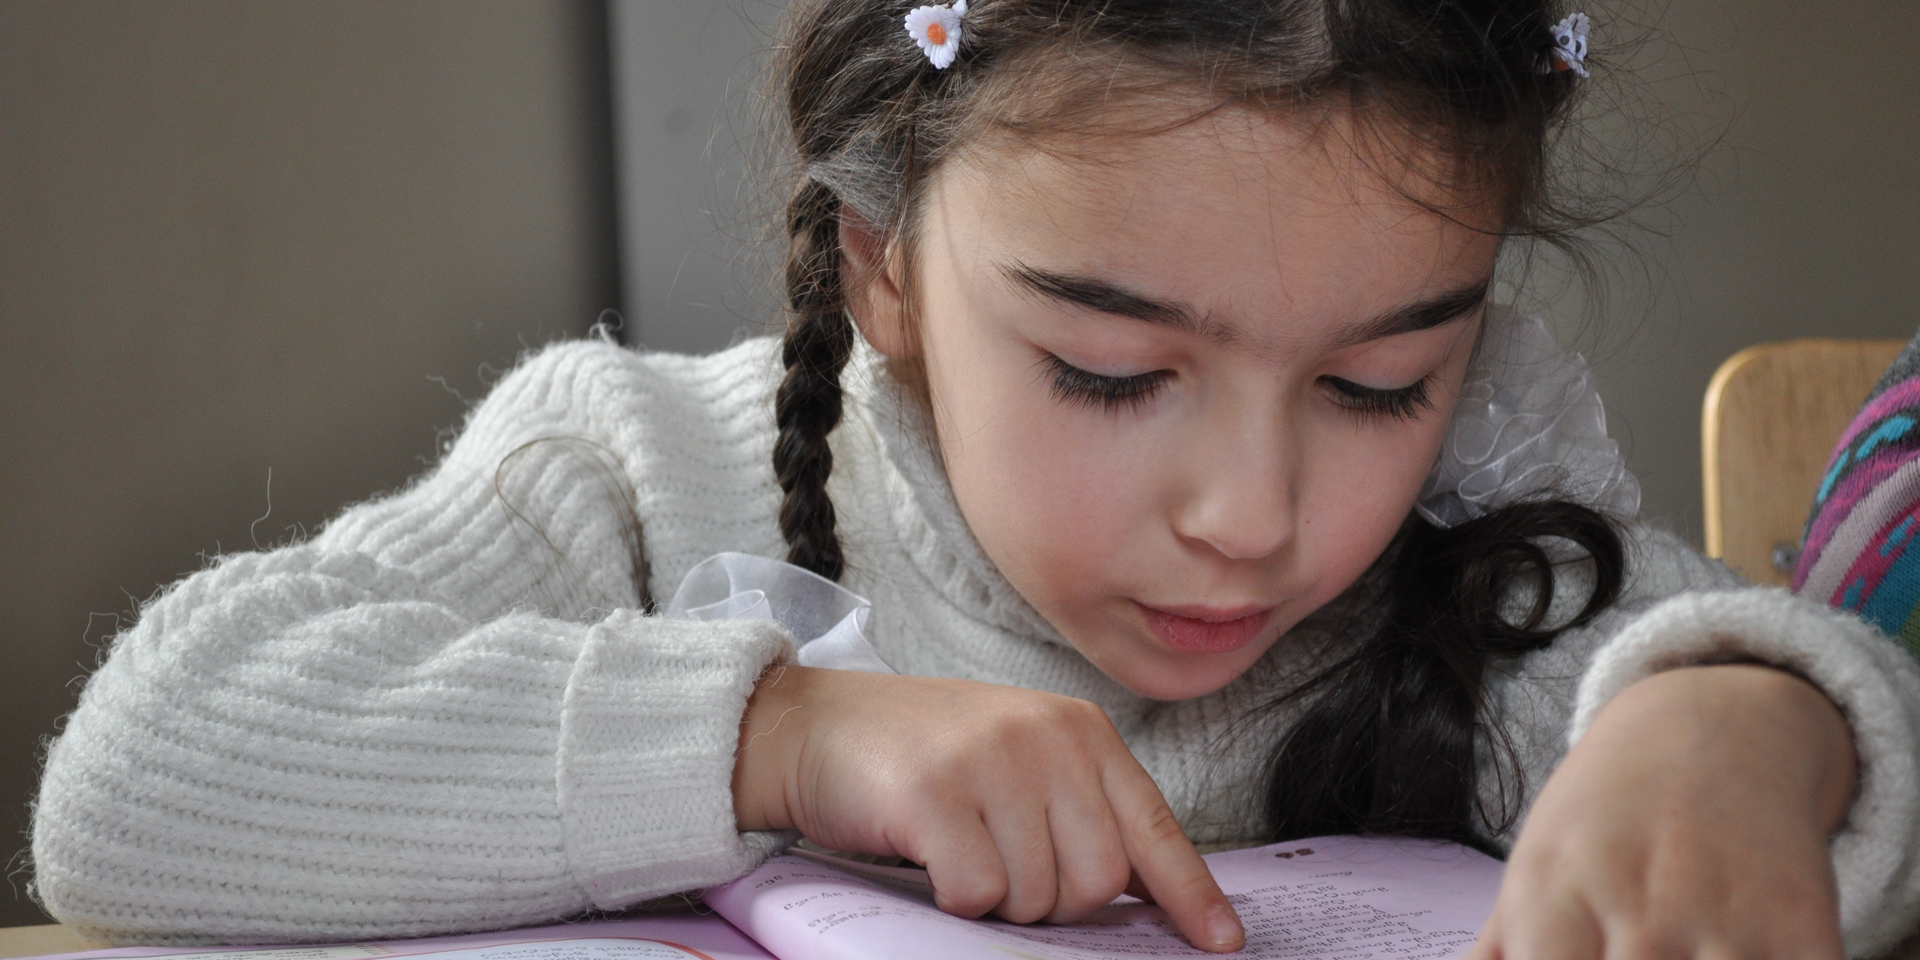 A young girl sitting at a school desk and reading from a purple-colored book.